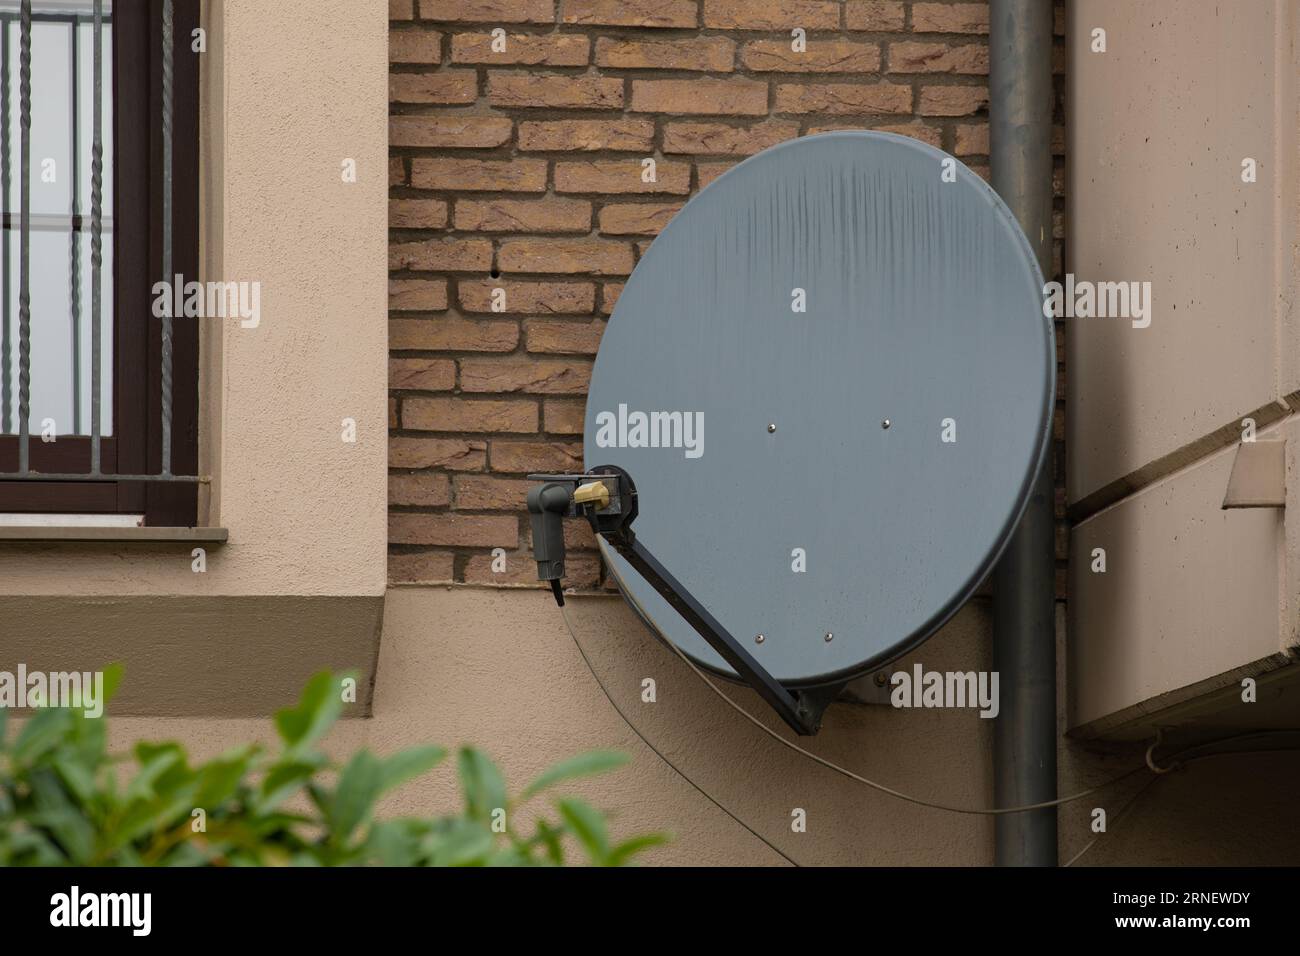 satellite dish antenna outdoor mounted at wall to recieve sat tv signal from outta space satellite Stock Photo